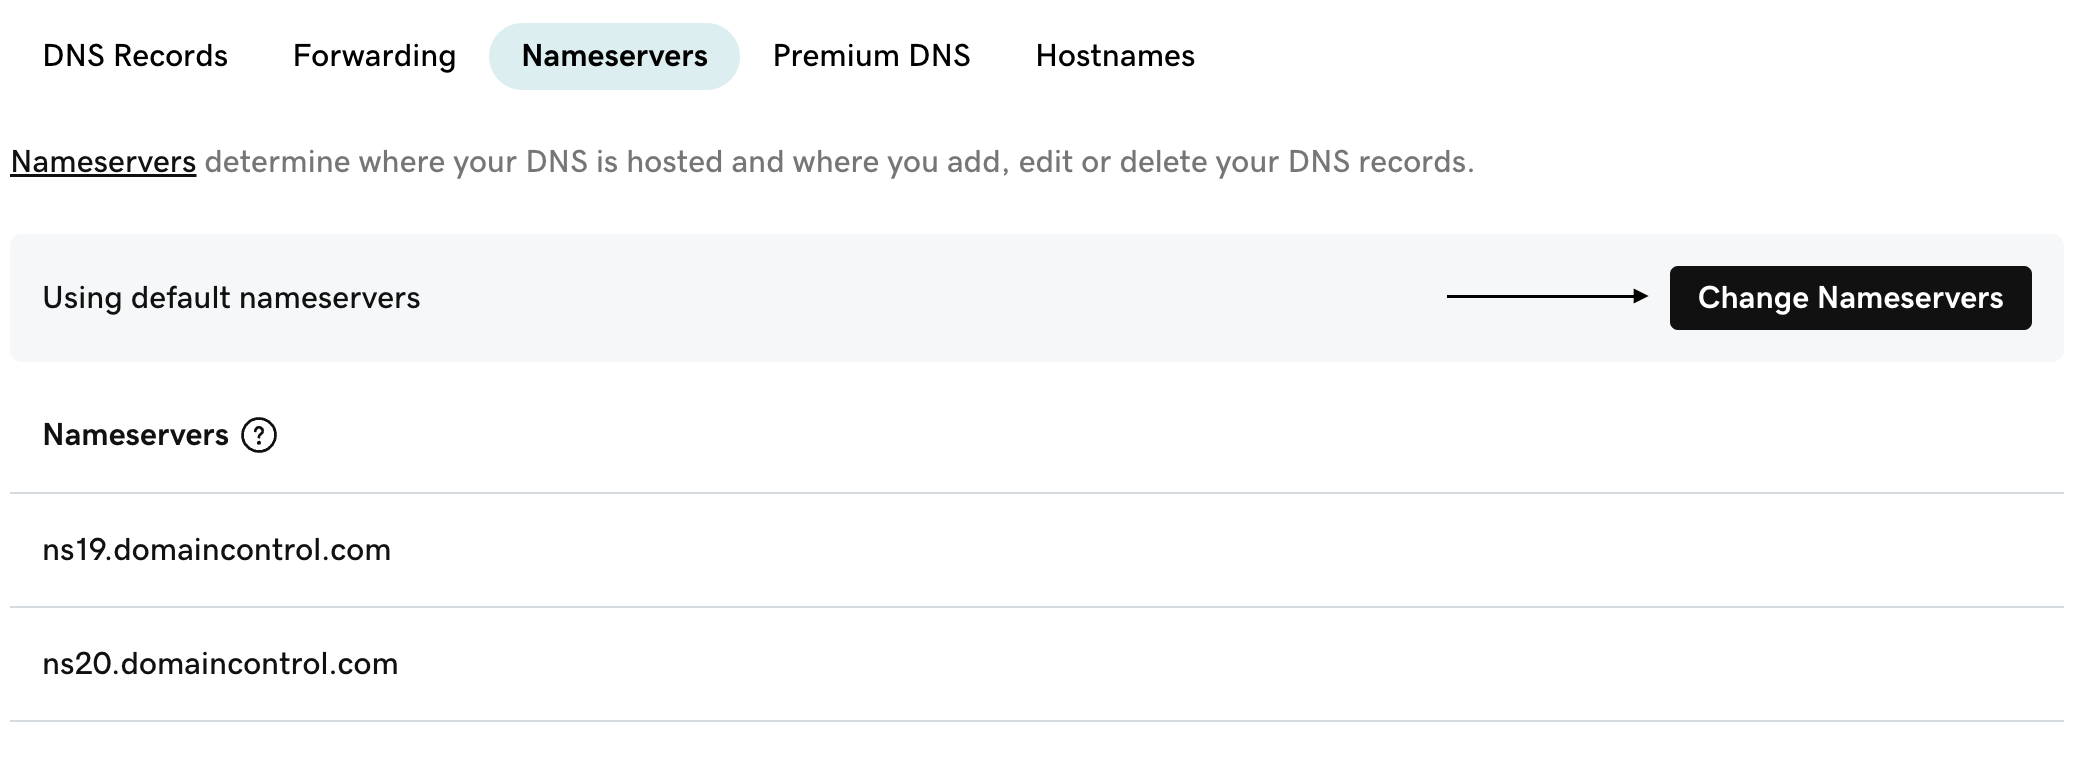 godaddy-manage-domain-dns-ns.png